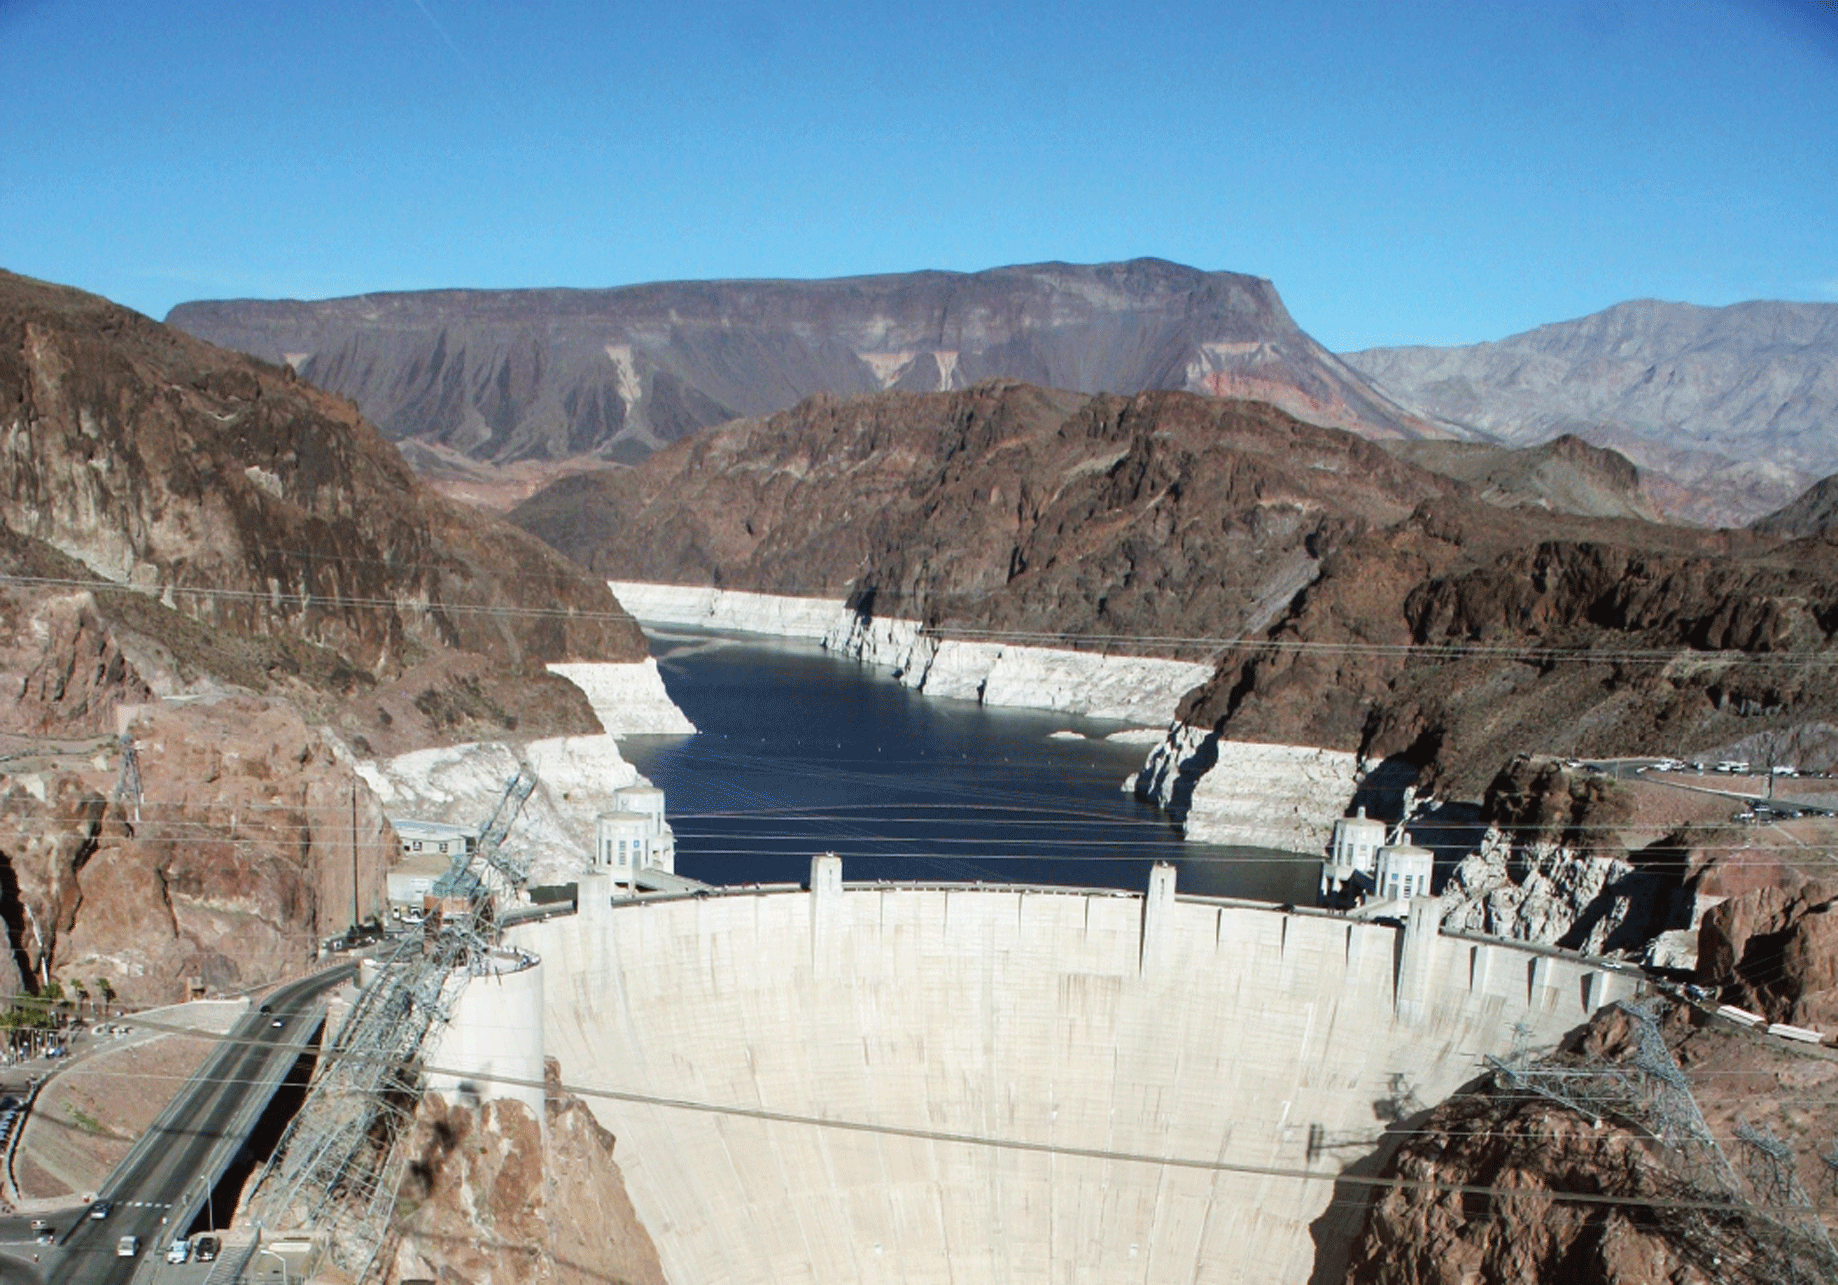 Hoover Dam in foreground with Lake Mead in the background.